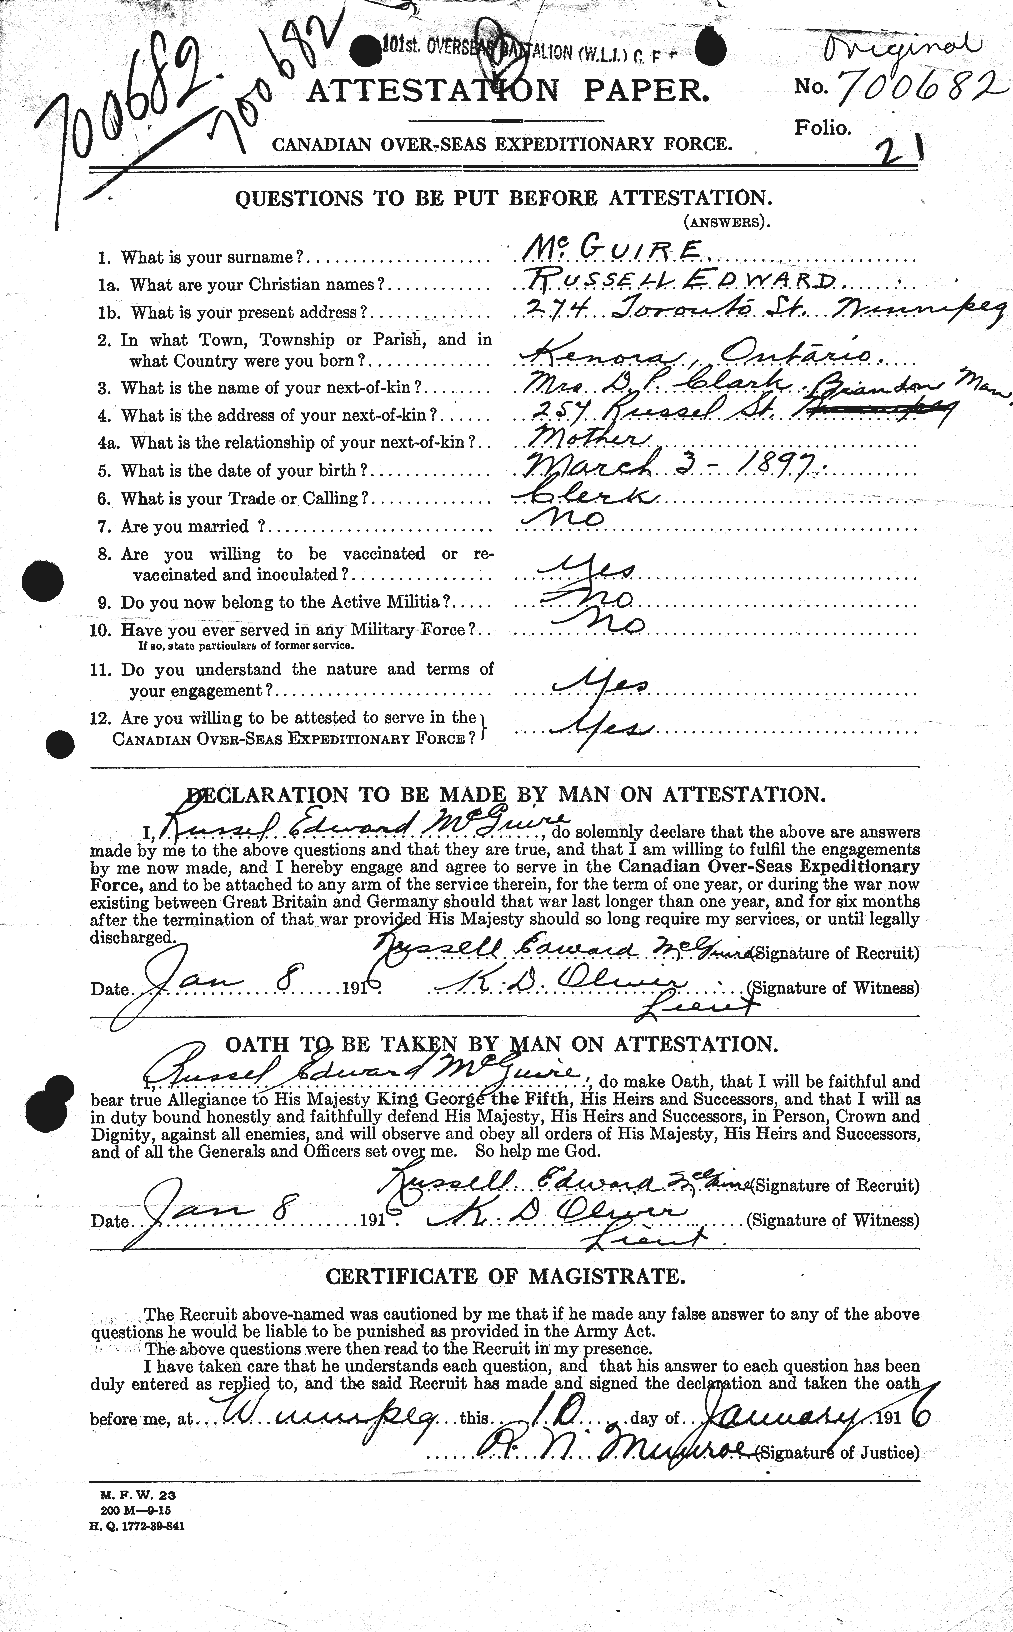 Personnel Records of the First World War - CEF 524114a